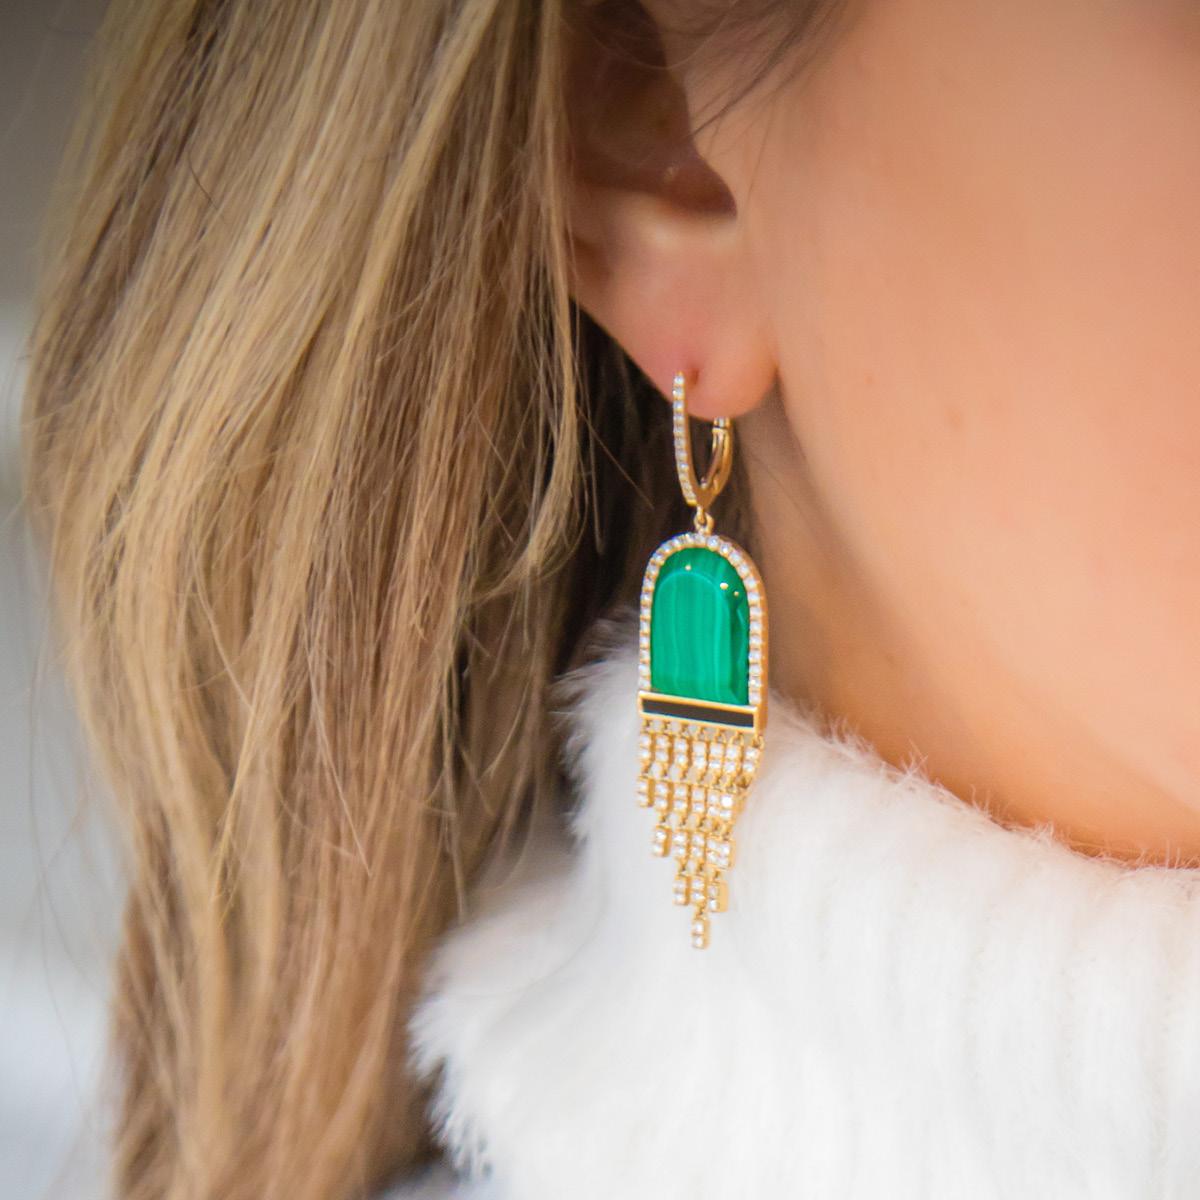 Art-Deco style Earrings featuring Malachite, Black Onyx Inlay, and diamonds set in 18K yellow gold. Chandelier Fringe design with nearly one and a half carats of flowing white diamonds. Diamon huggie-top enclosure. The Gatsby collection from Doves